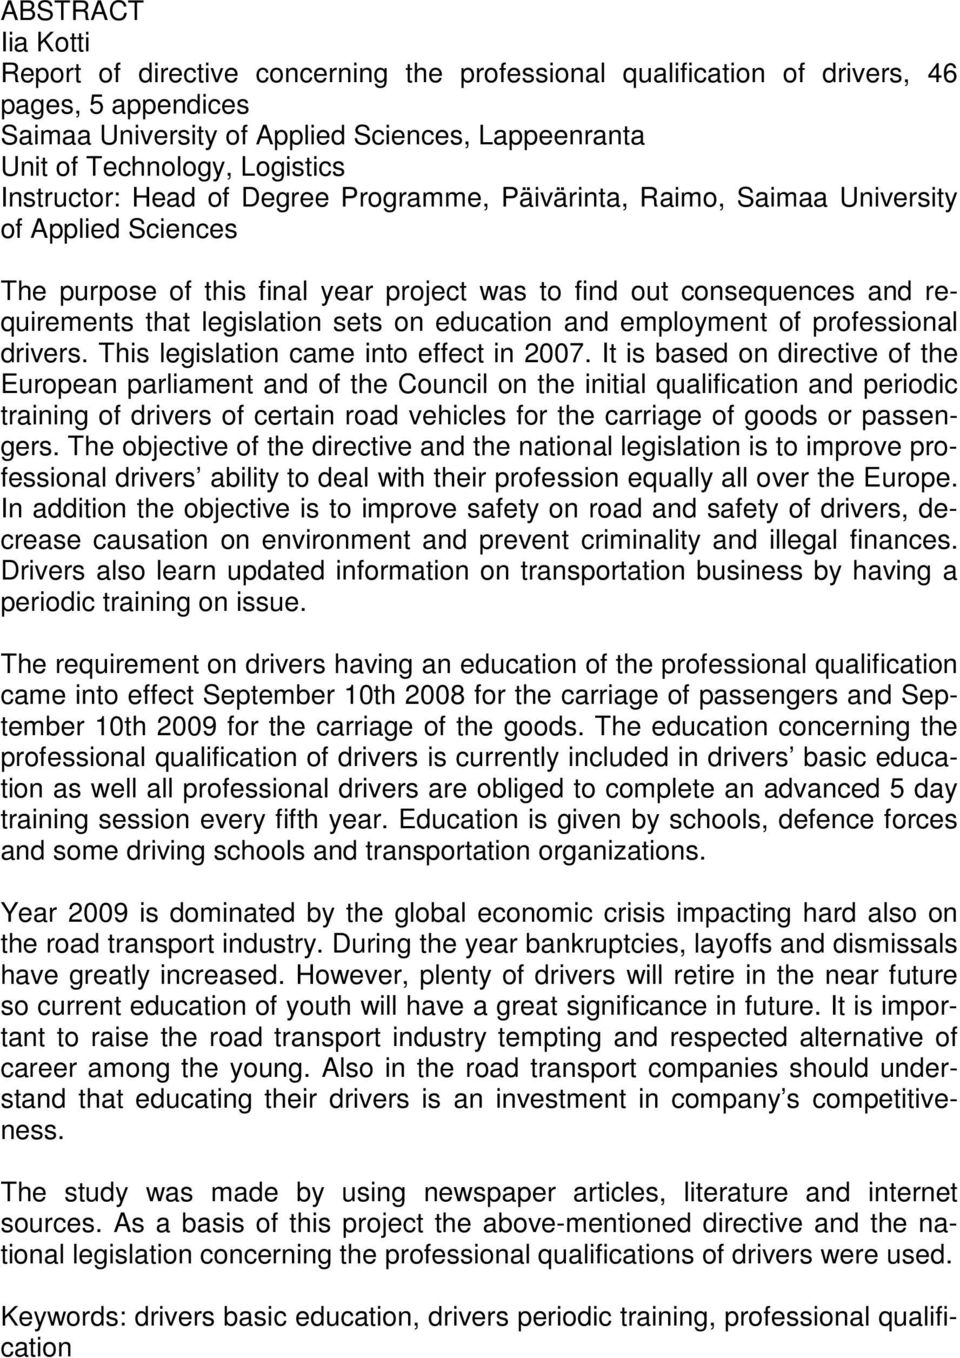 sets on education and employment of professional drivers. This legislation came into effect in 2007.